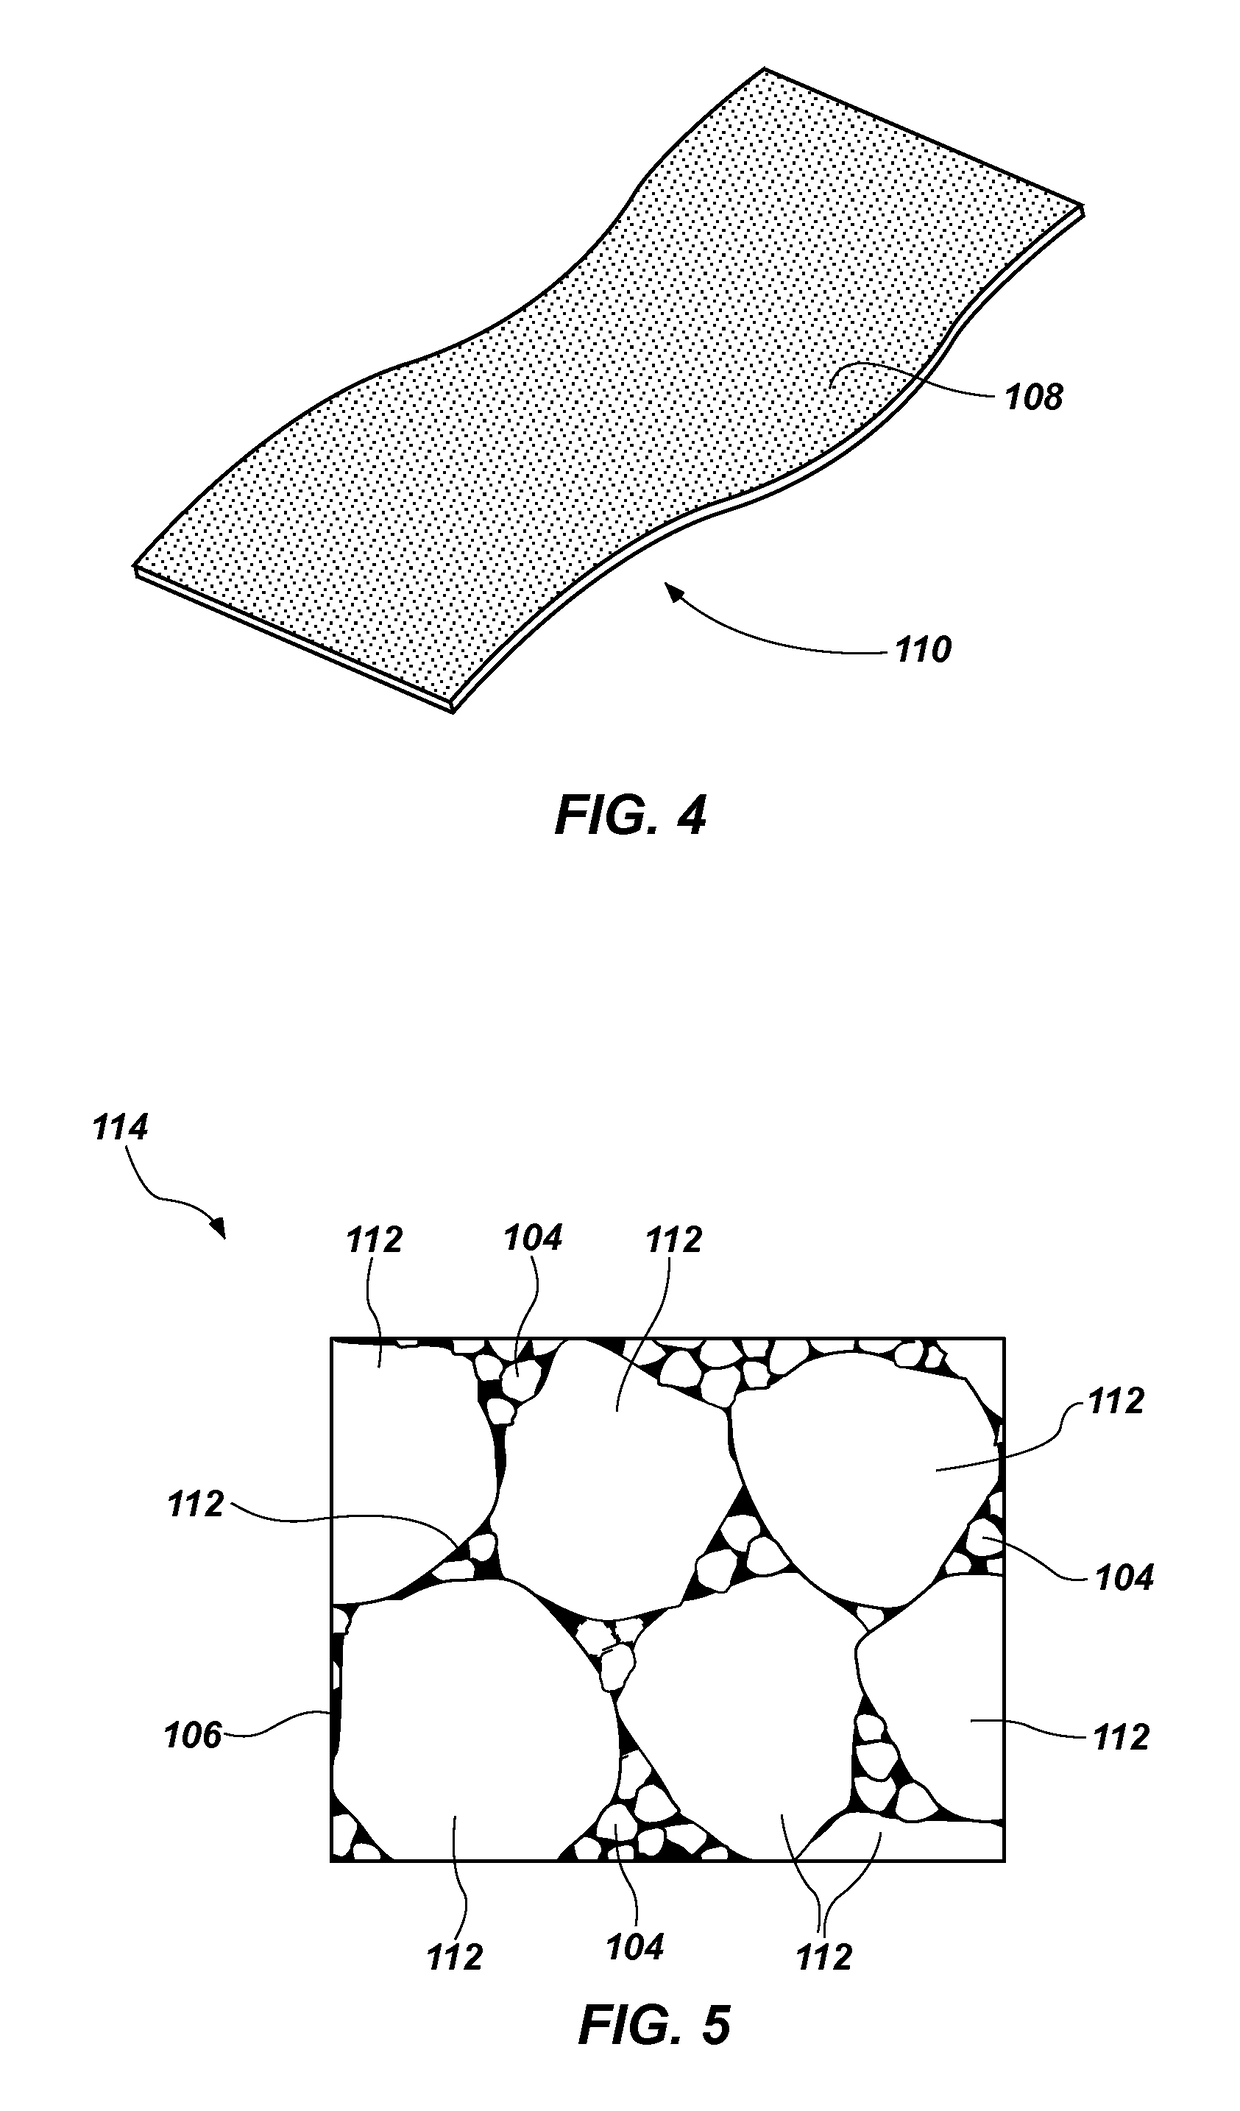 Methods of fabricating polycrystalline diamond by functionalizing diamond nanoparticles, green bodies including functionalized diamond nanoparticles, and methods of forming polycrystalline diamond cutting elements